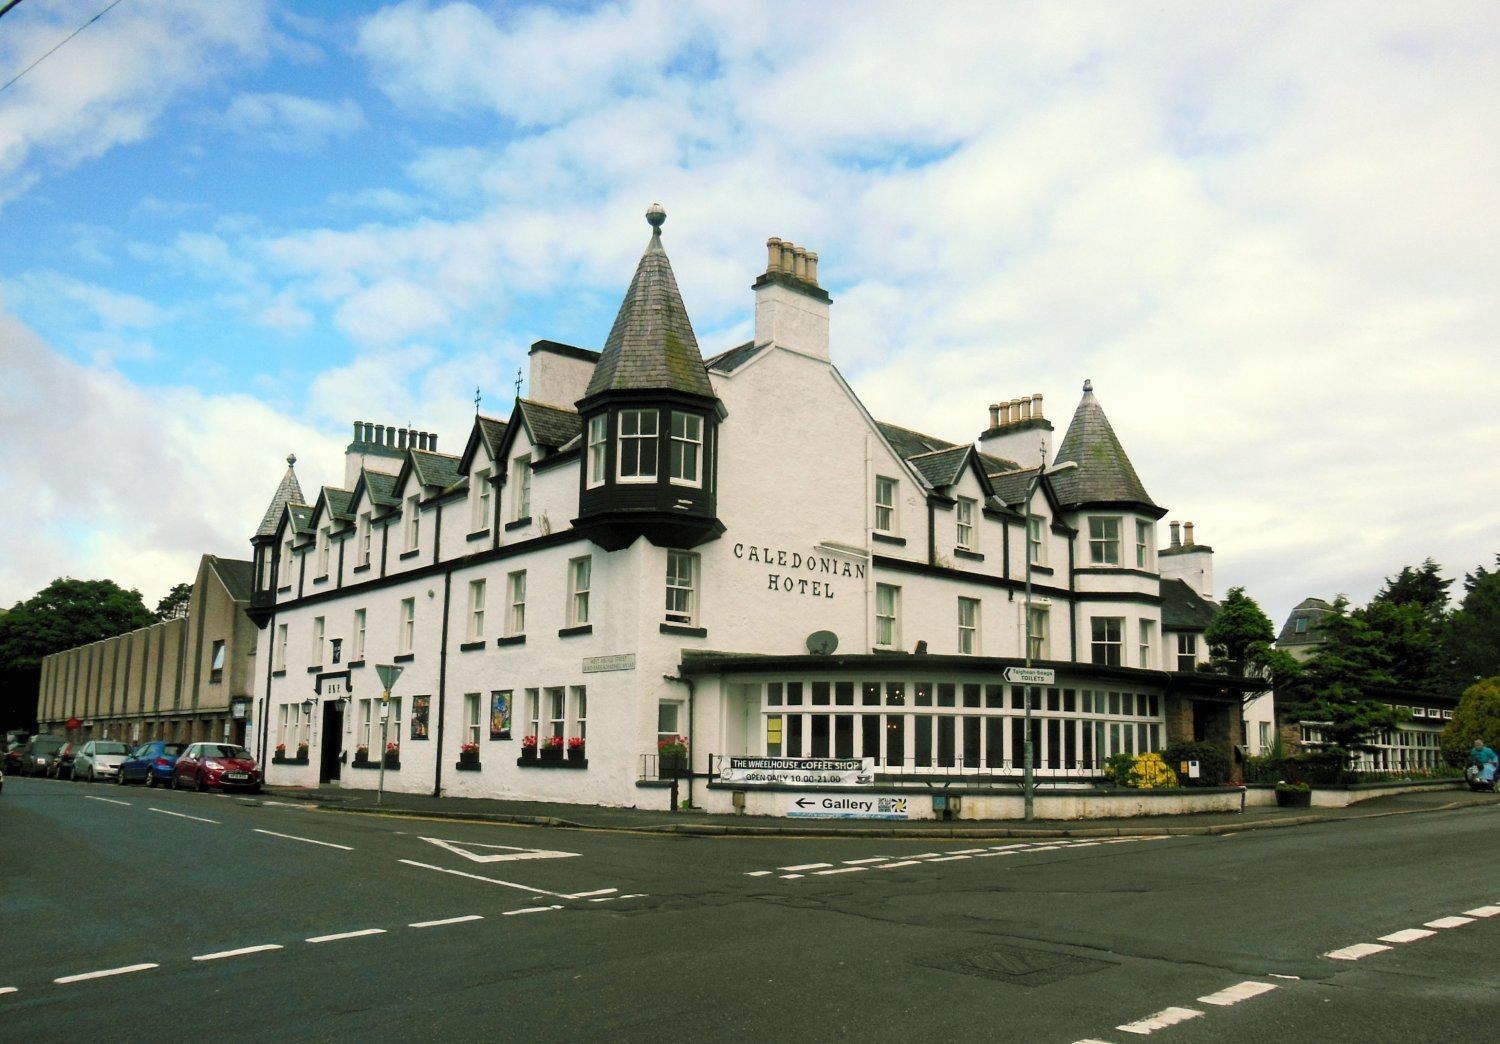 Ullapool hotel put on the market as potential buyers told of NC500 spin